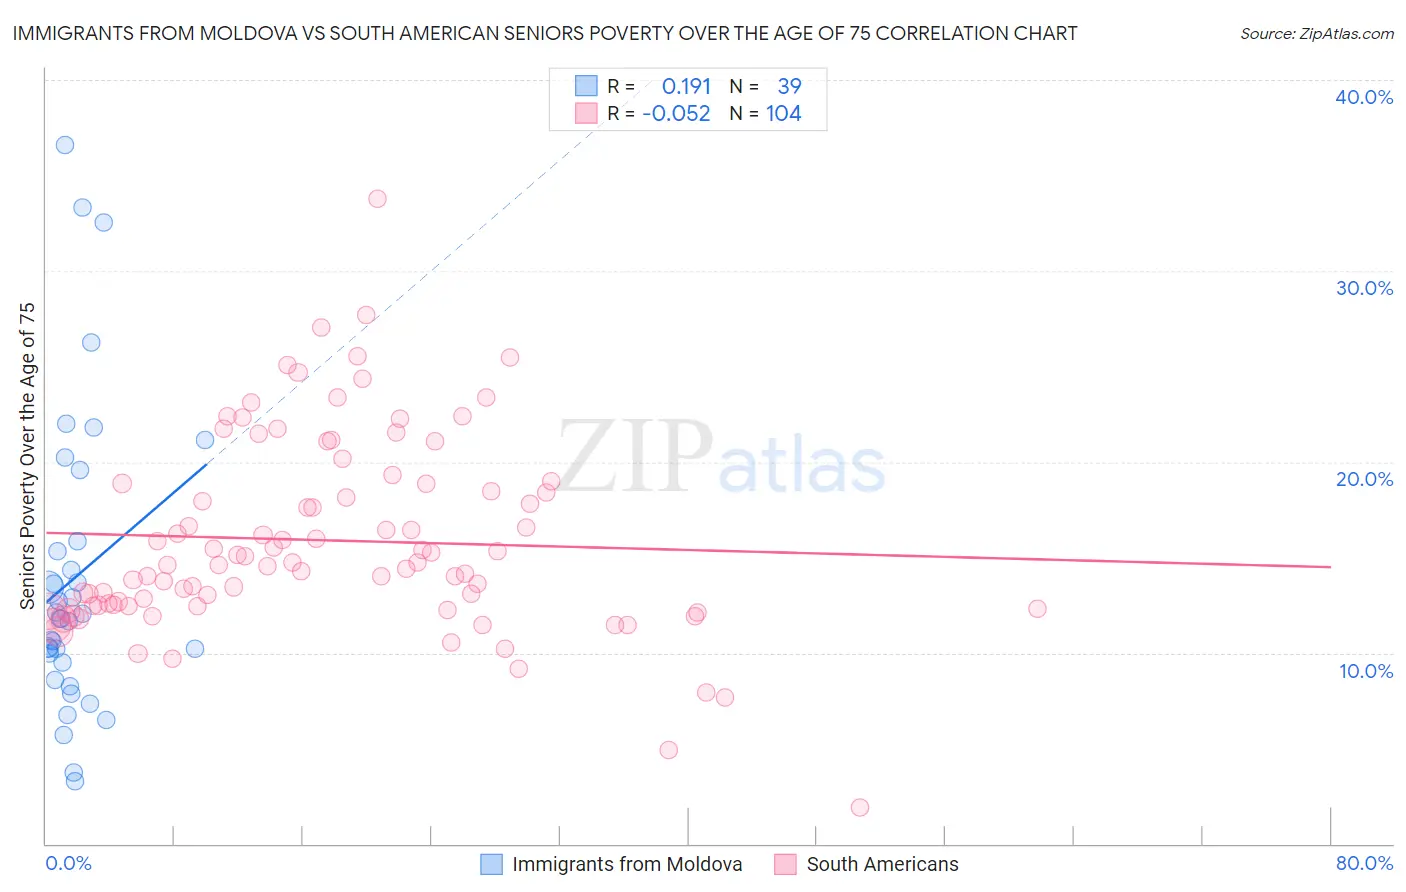 Immigrants from Moldova vs South American Seniors Poverty Over the Age of 75